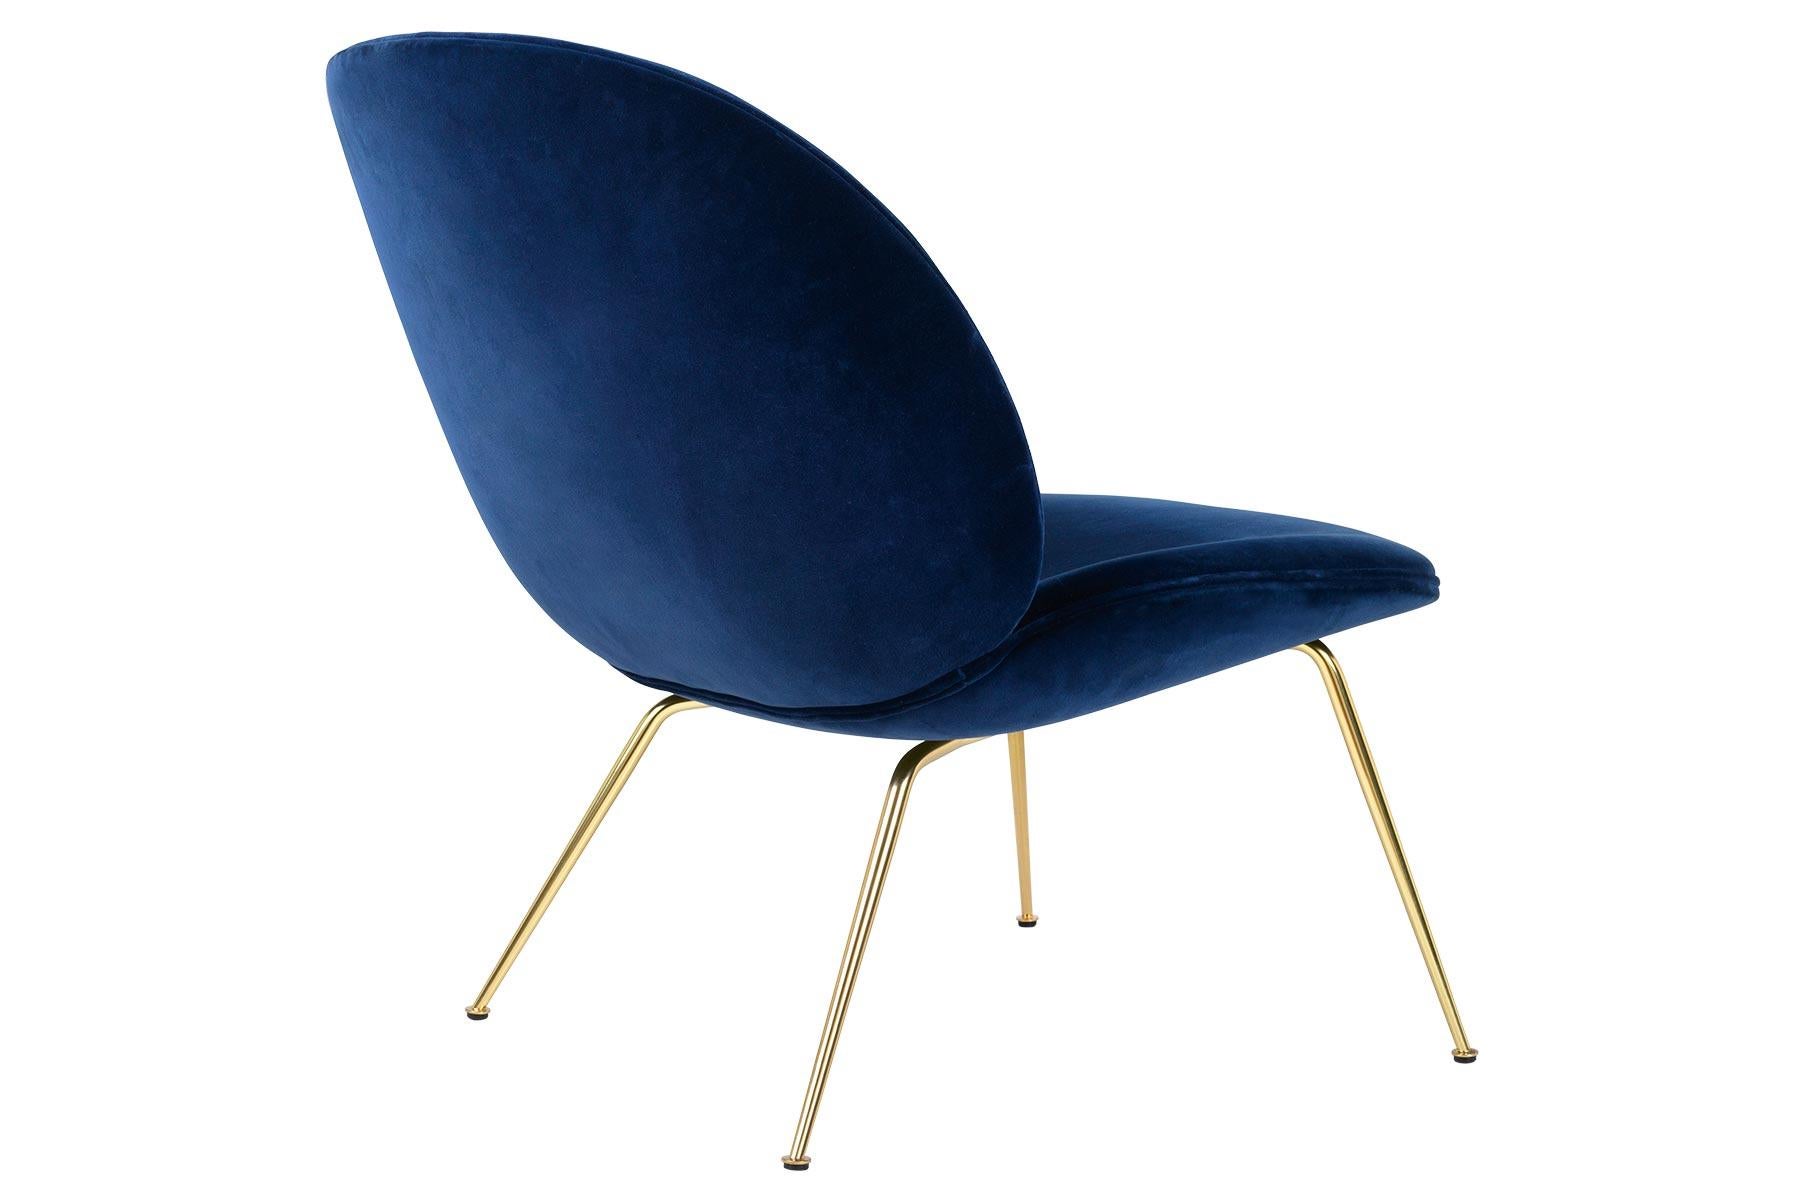 Beetle Lounge Chair, Fully Upholstered, Conic Base, Antique Brass In Excellent Condition For Sale In Berkeley, CA